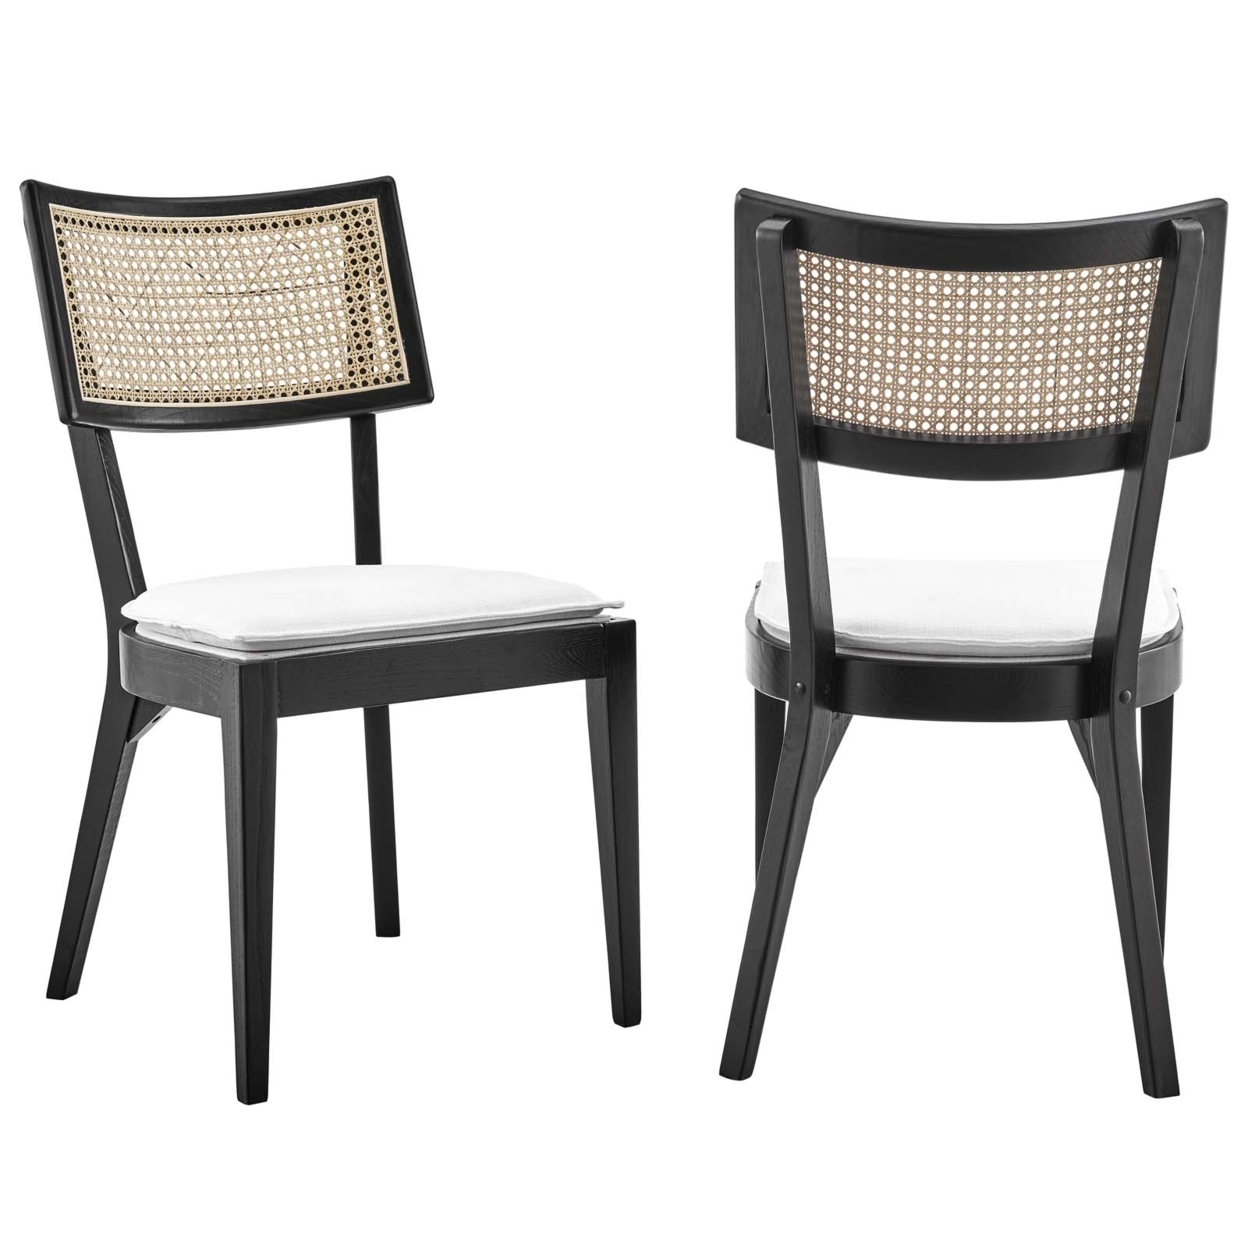 Caledonia Wood Dining Chair Set Of 2, Black White